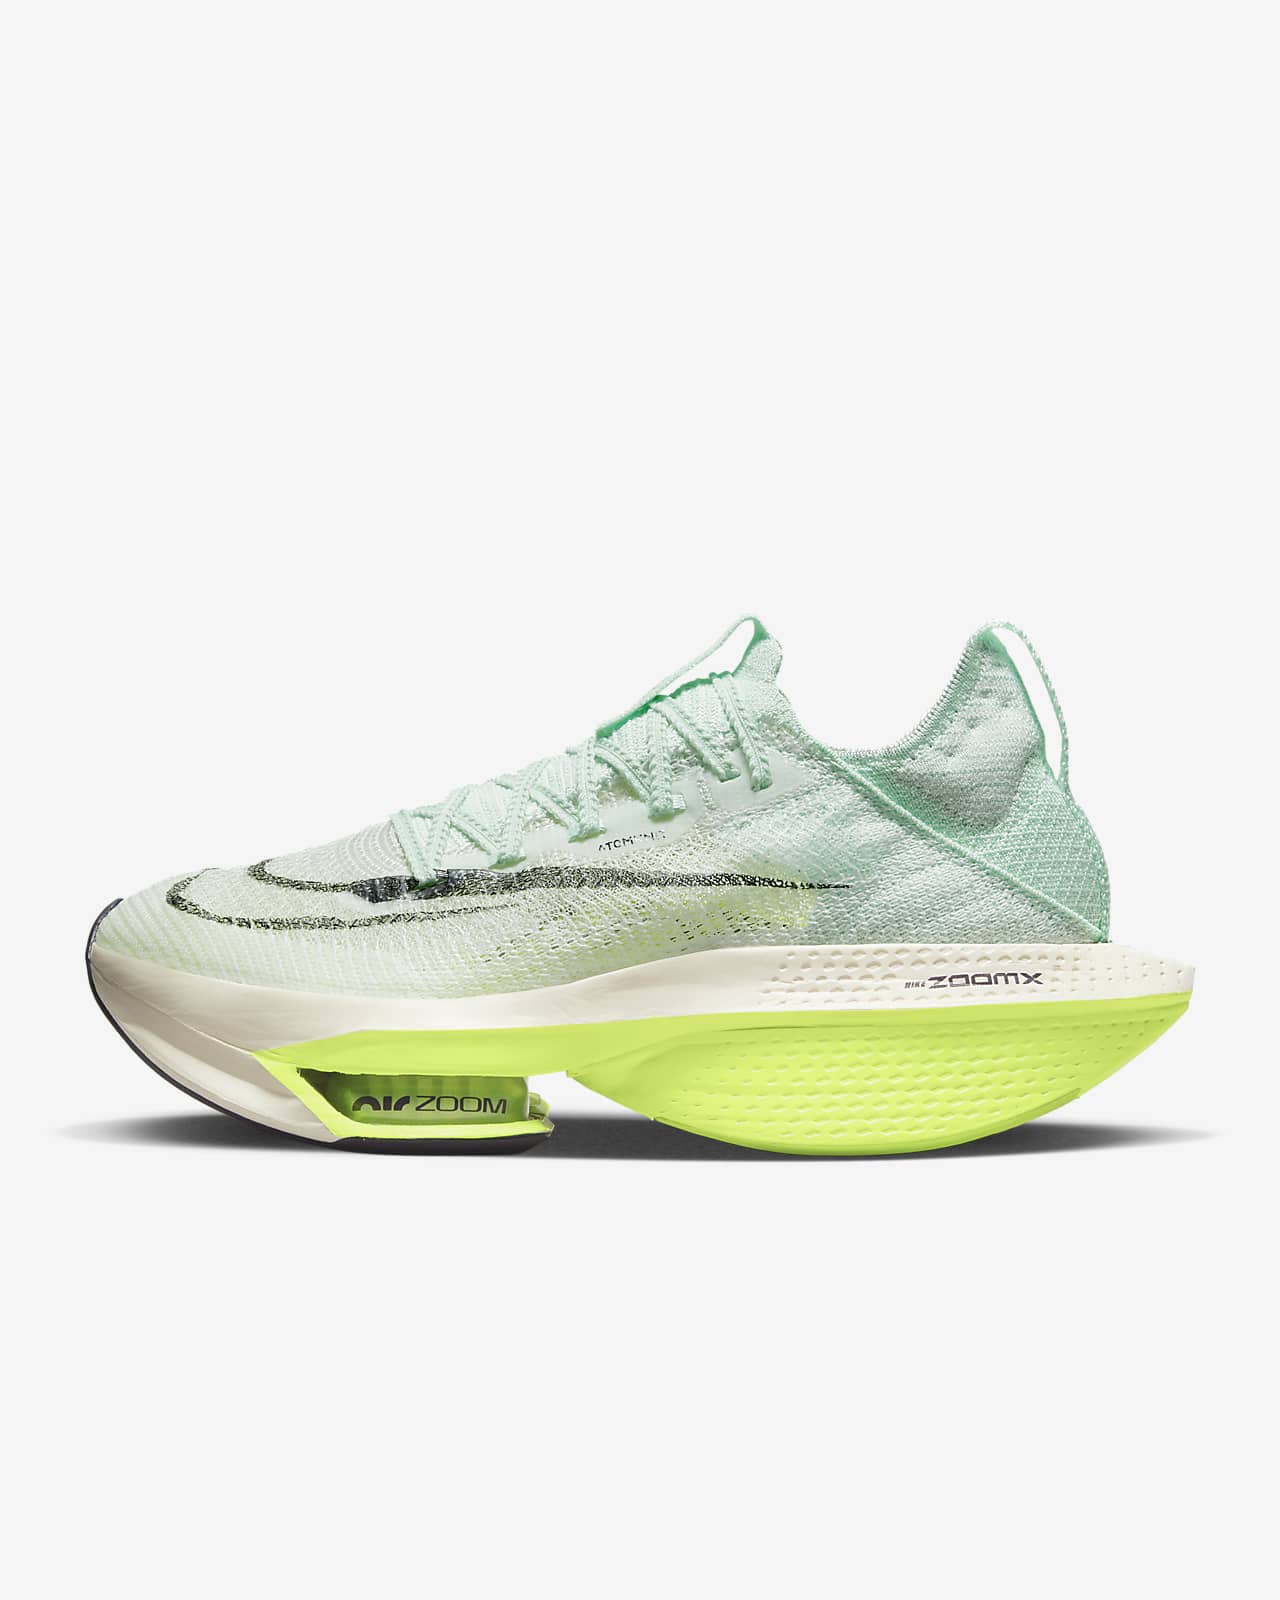 Nike Air Zoom Alphafly NEXT% 2 Women's Road Racing Shoes